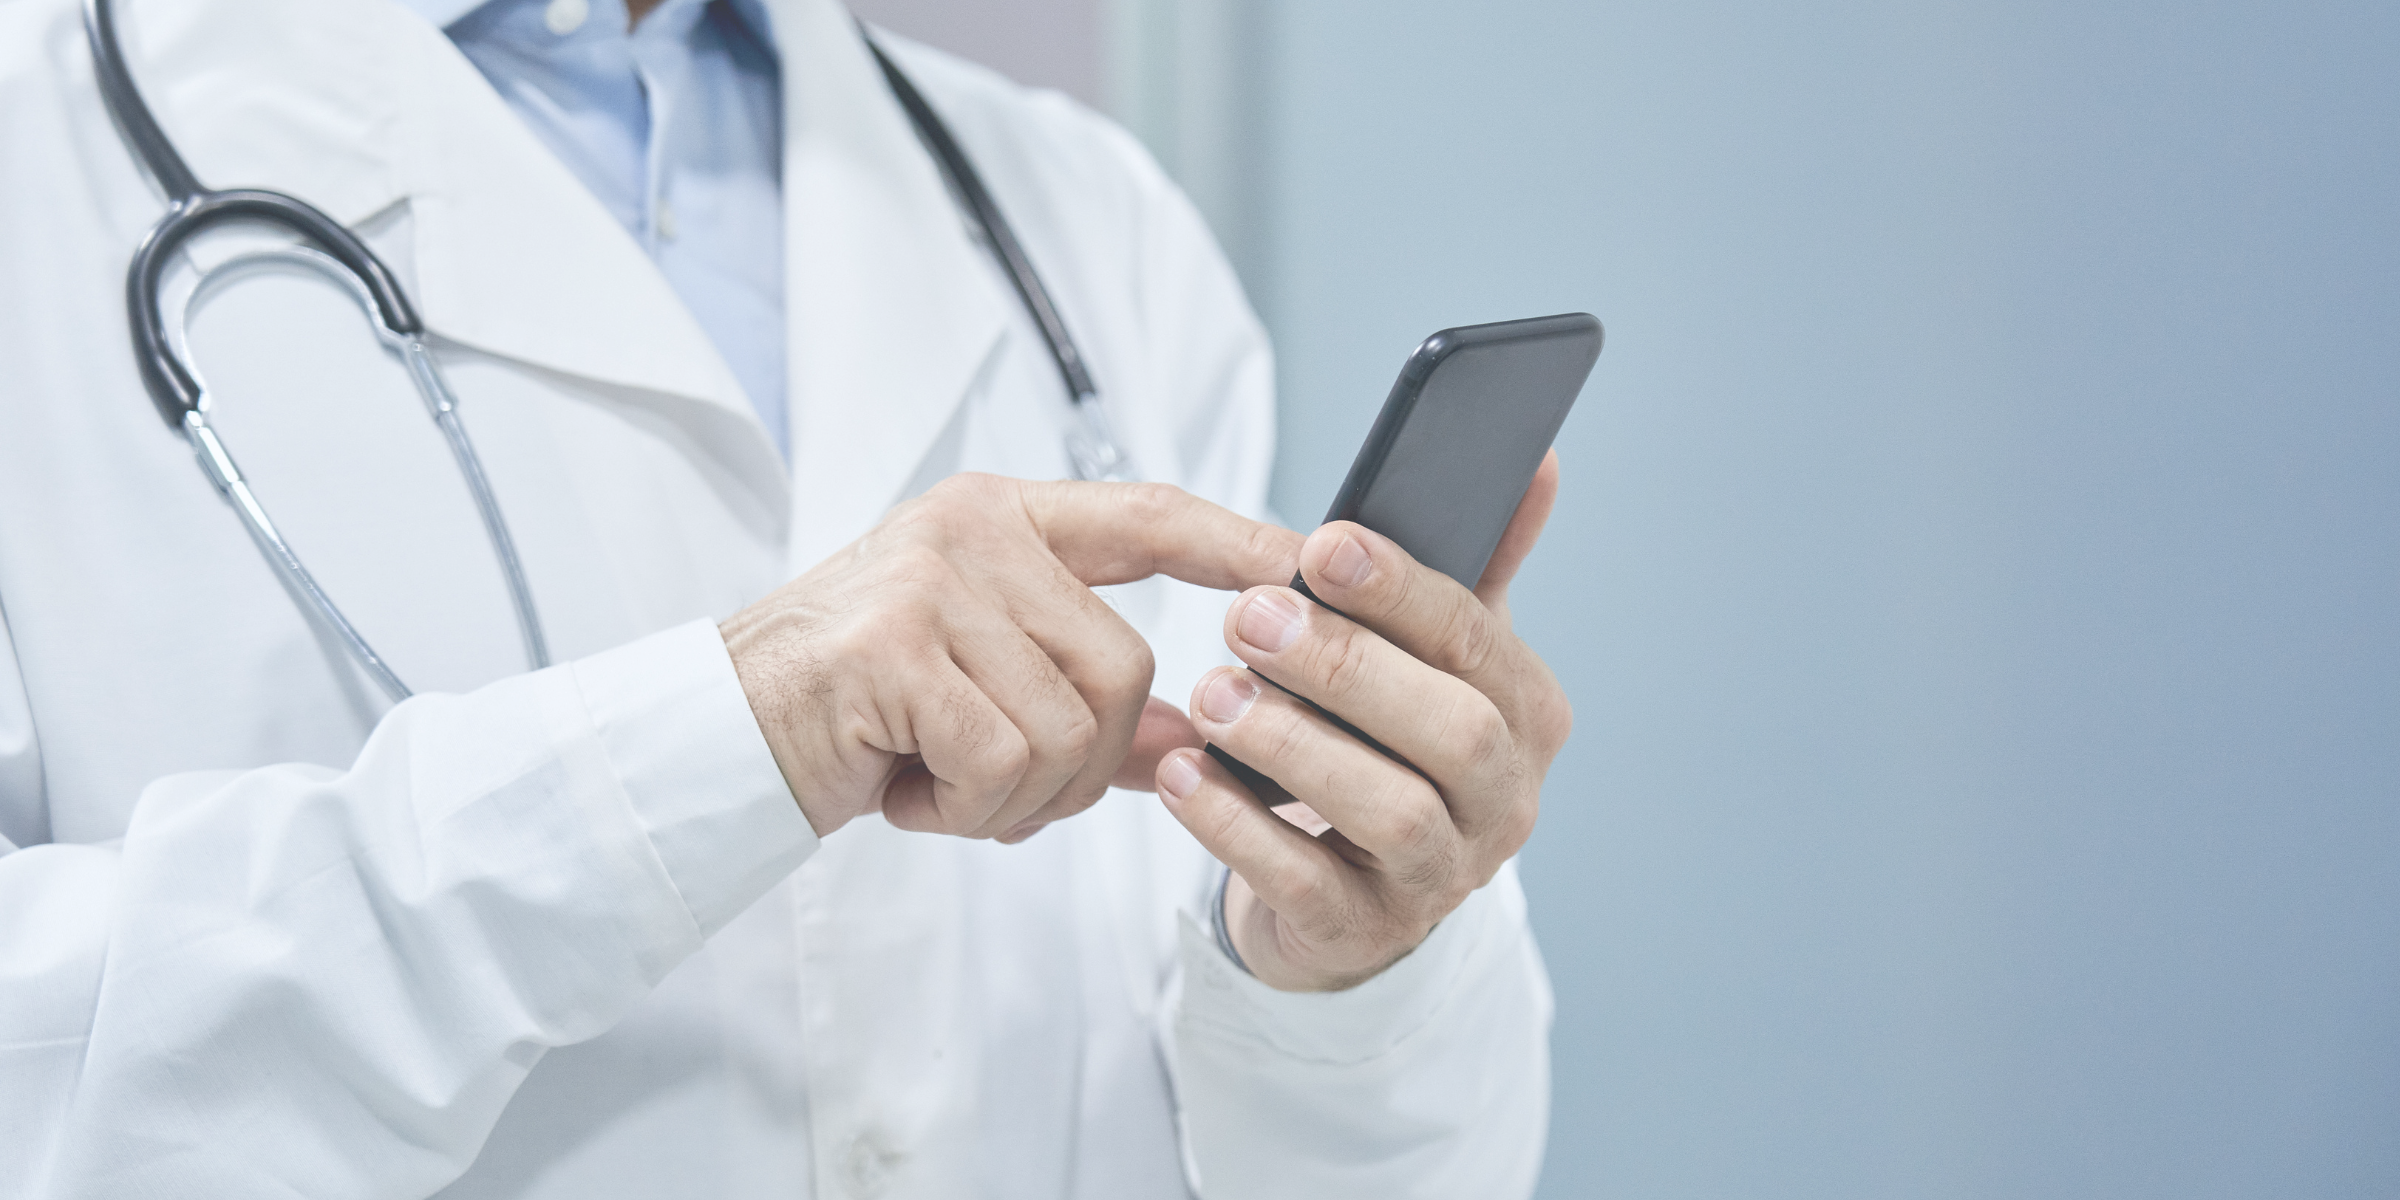 Healthcare provider texting patient information securely to another doctor which is now allowed by CMS